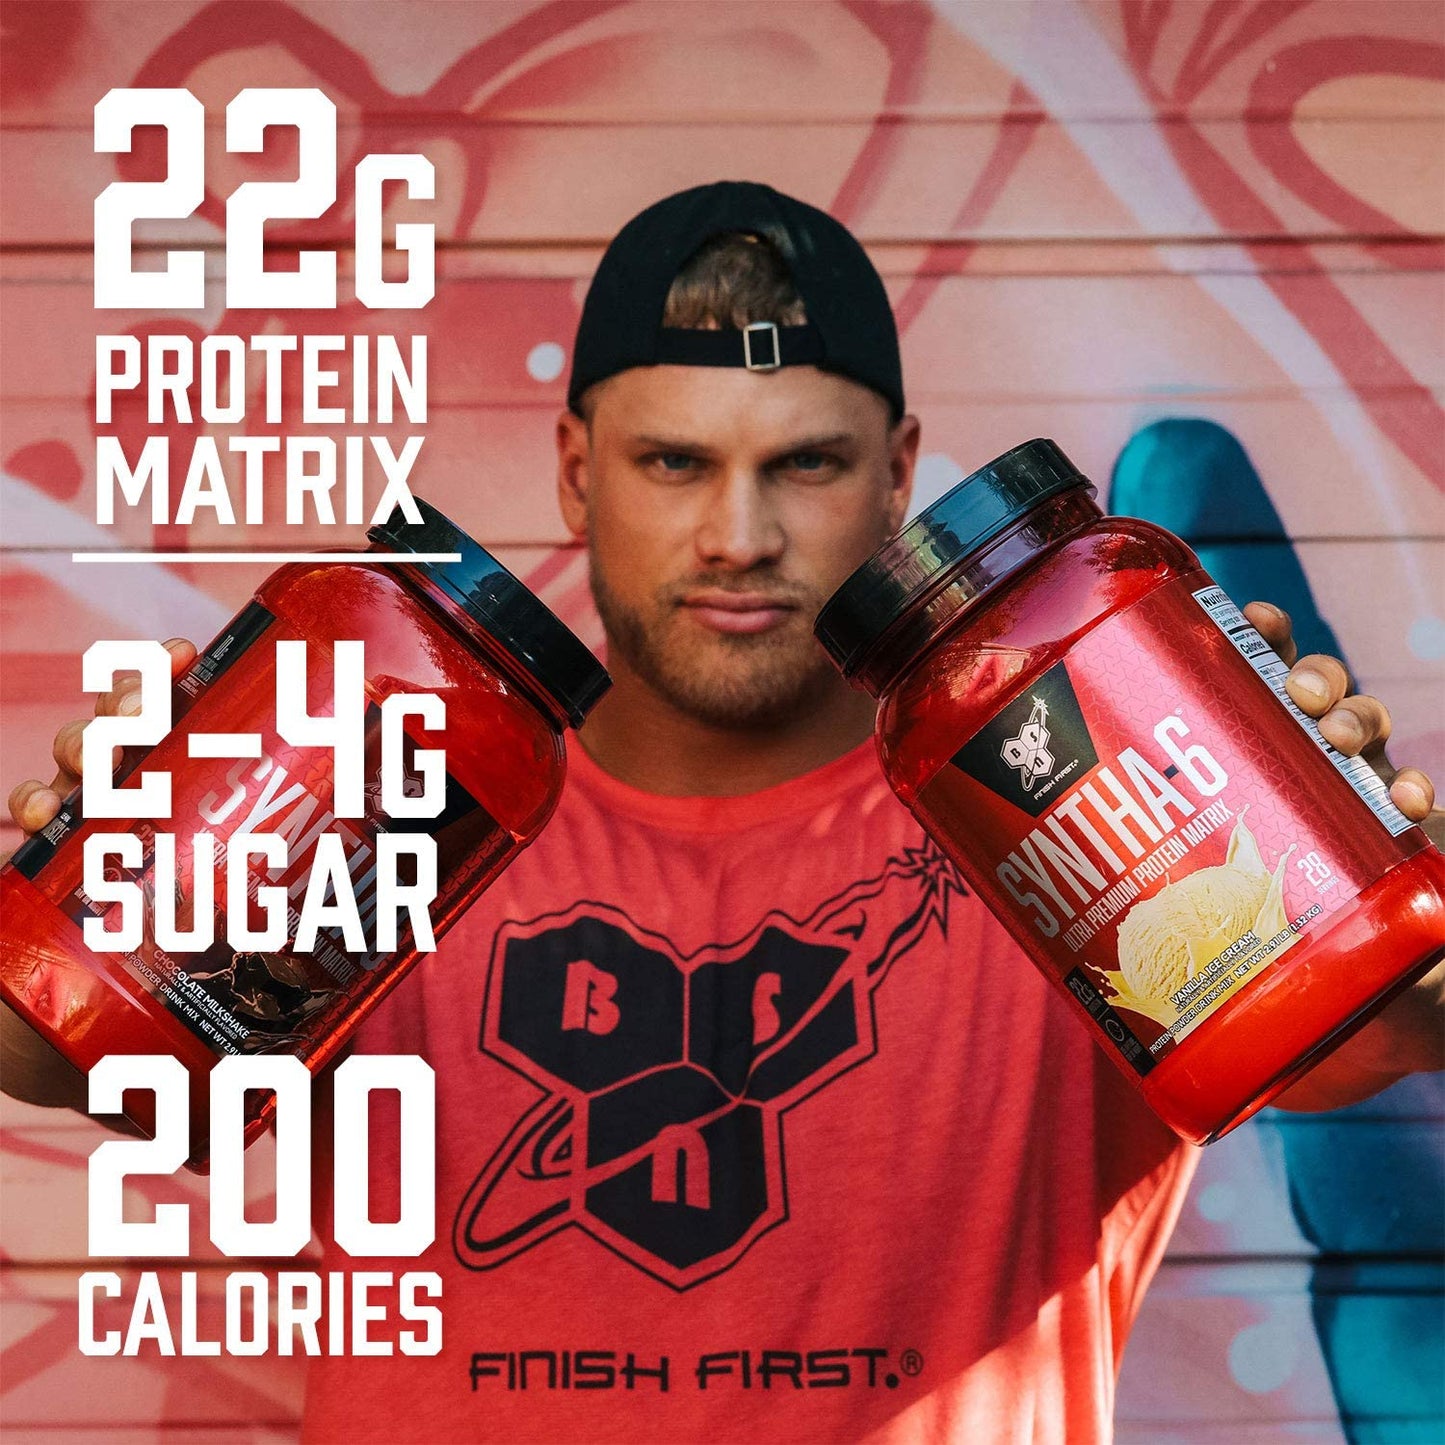 BSN - Syntha-6 Premium Protein Mint Mint Chocolate Chocolate Chip - 25 Servings